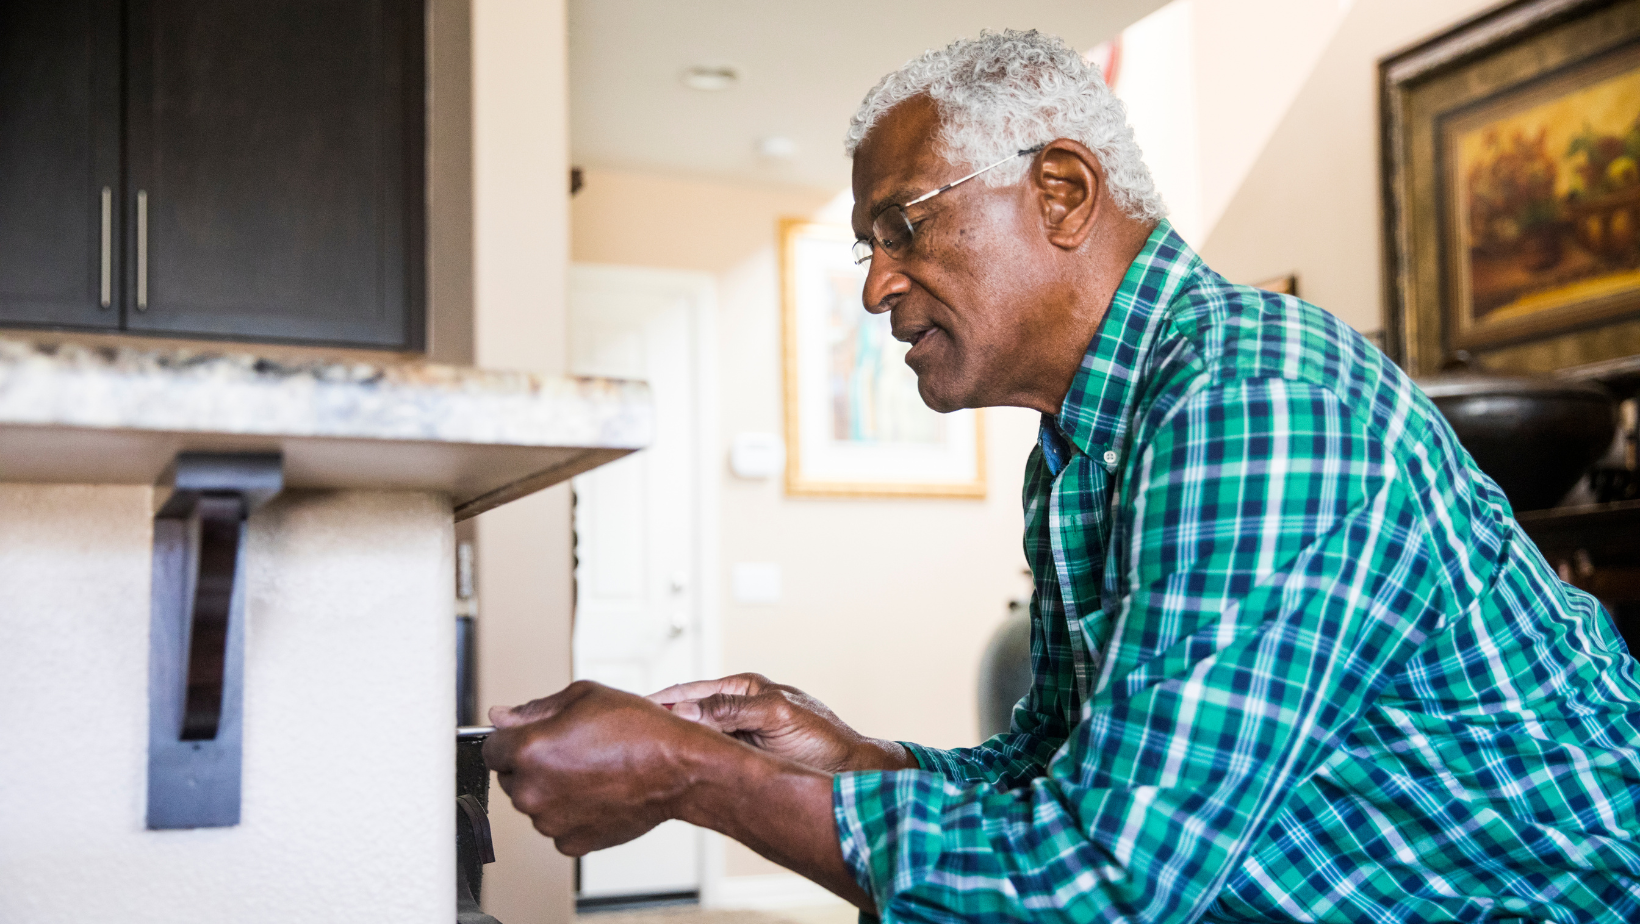 Home Safety for Alzheimer’s and Dementia